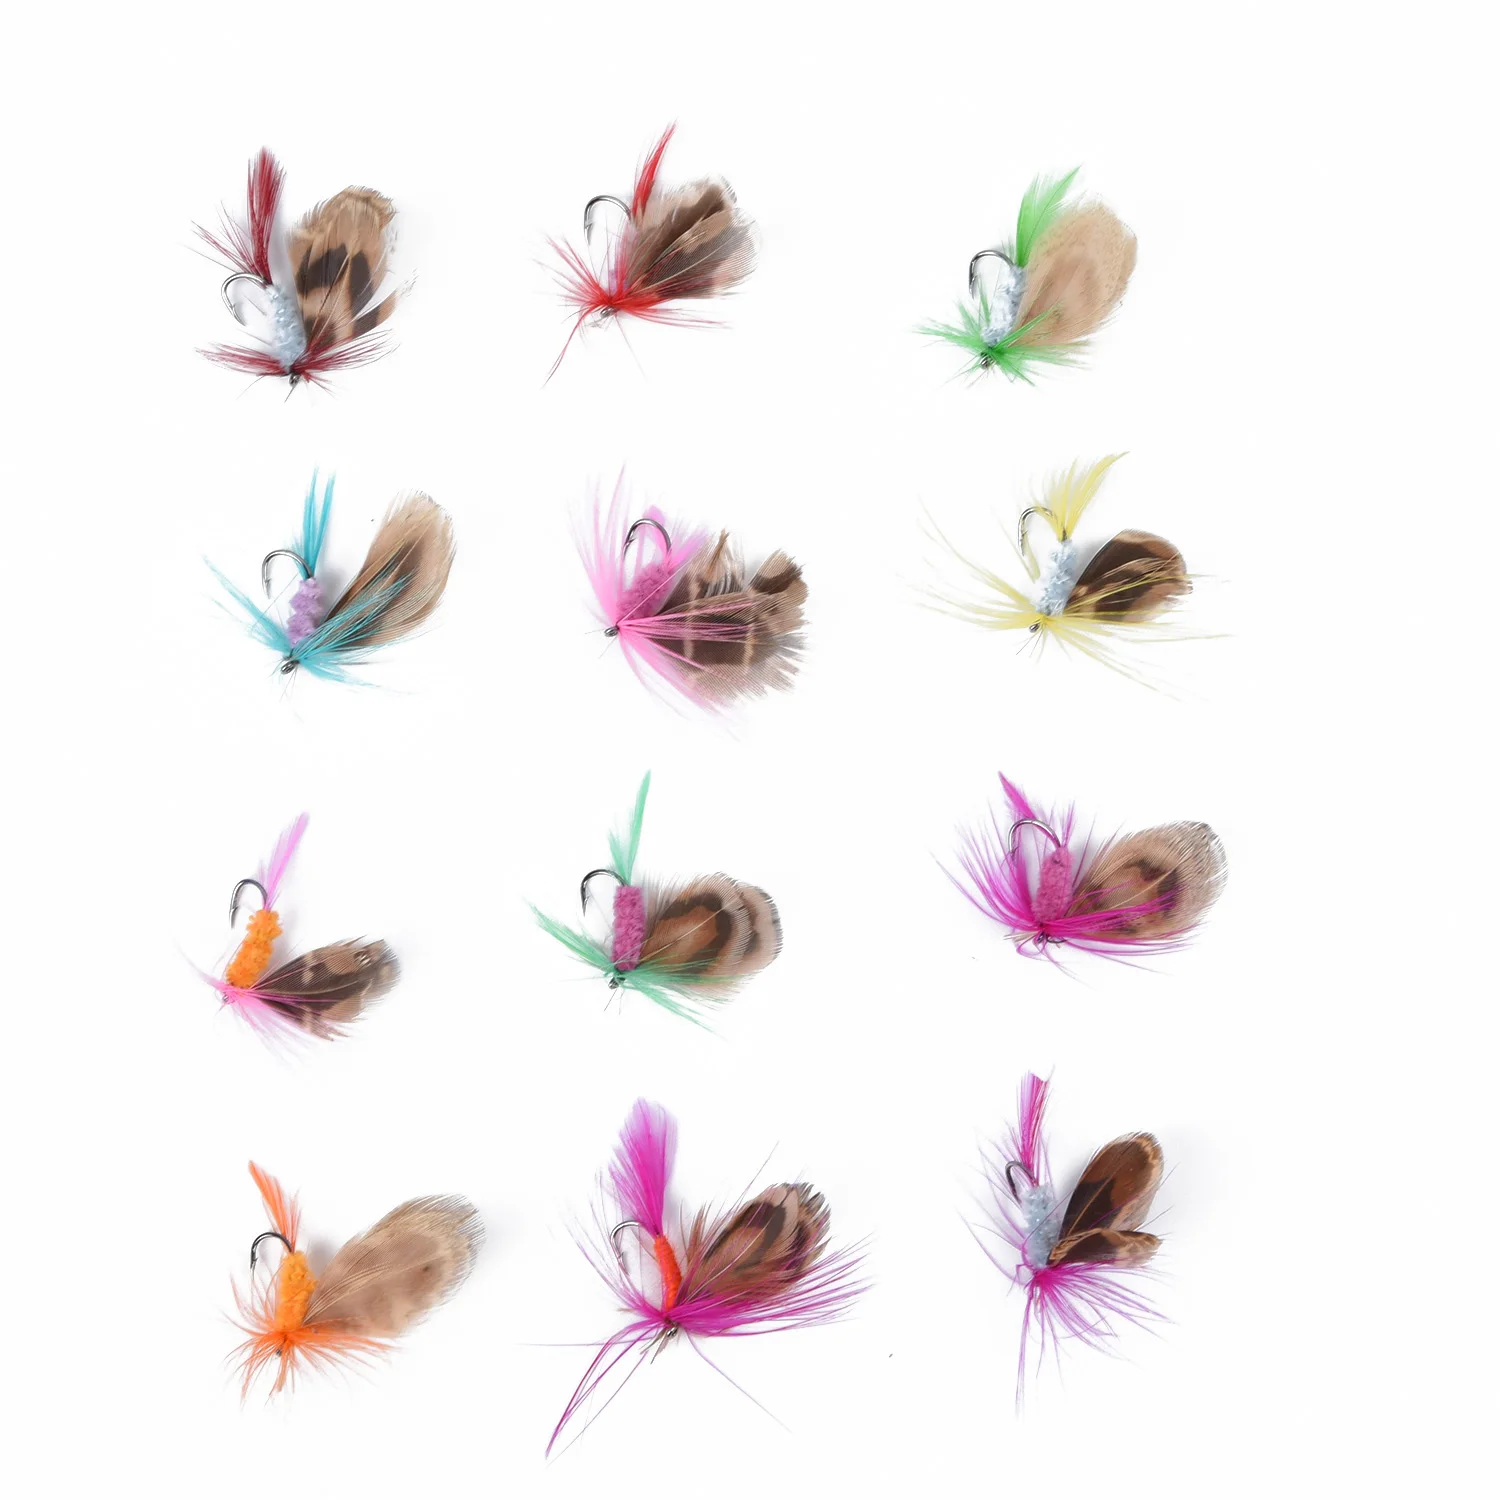 

12pcs/set Various Dry Fly Hooks Tool Fishing Trout Flies Fish Hook Lures Fishhook Artificial Insect Bait Lure Pesca Iscas Tackle